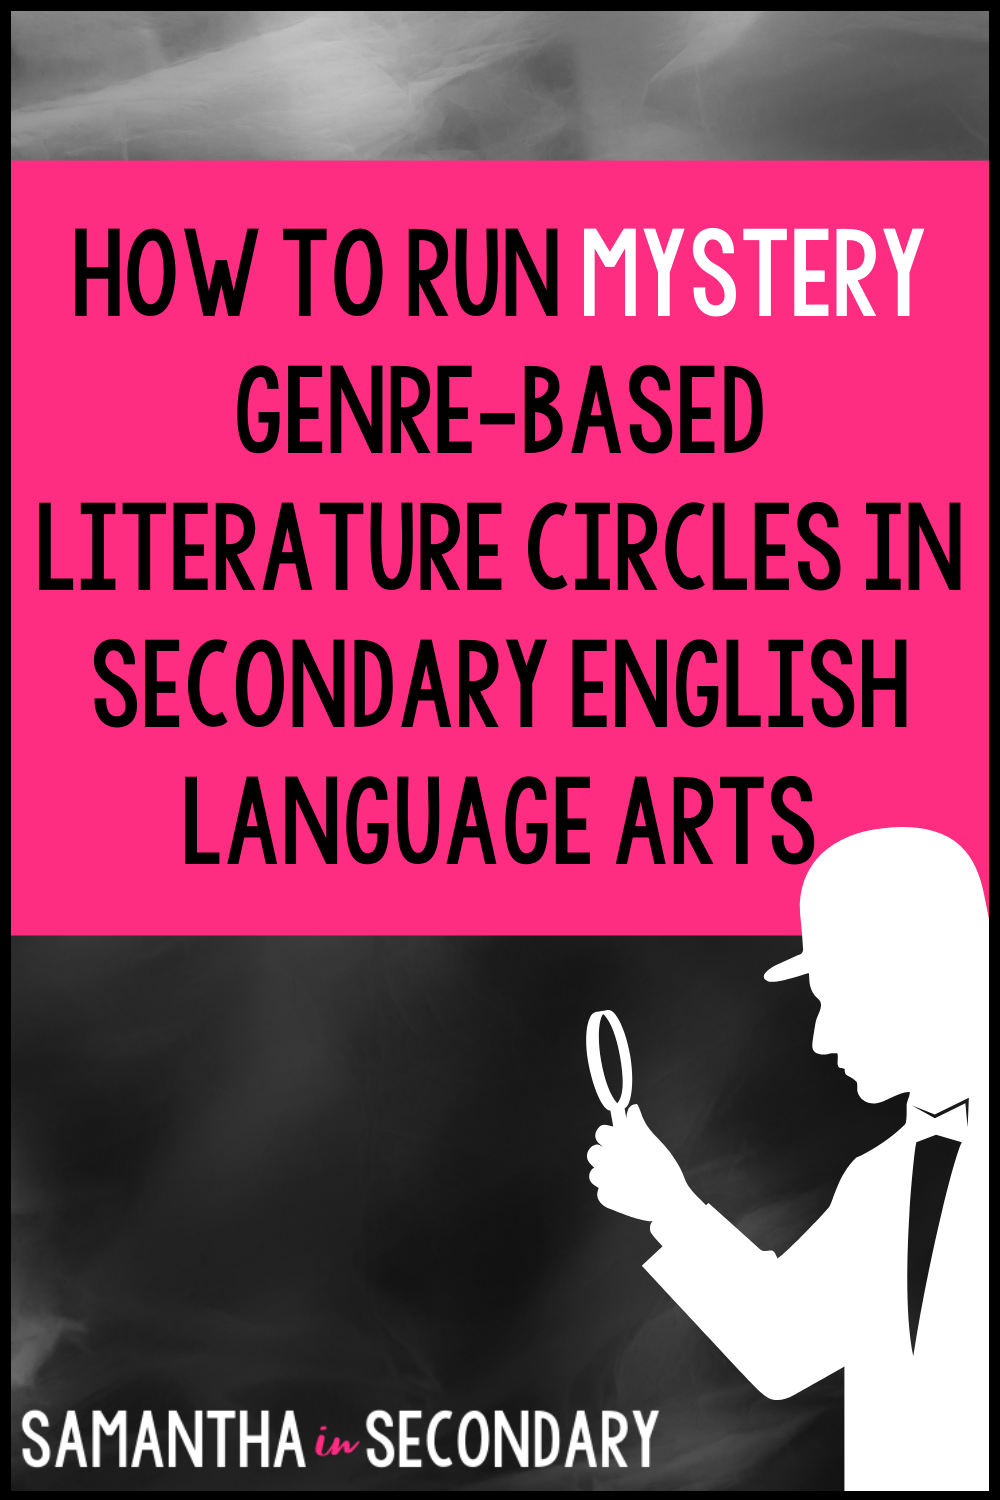 How to Run Mystery Genre-Based Literature Circles in Secondary English Language Arts